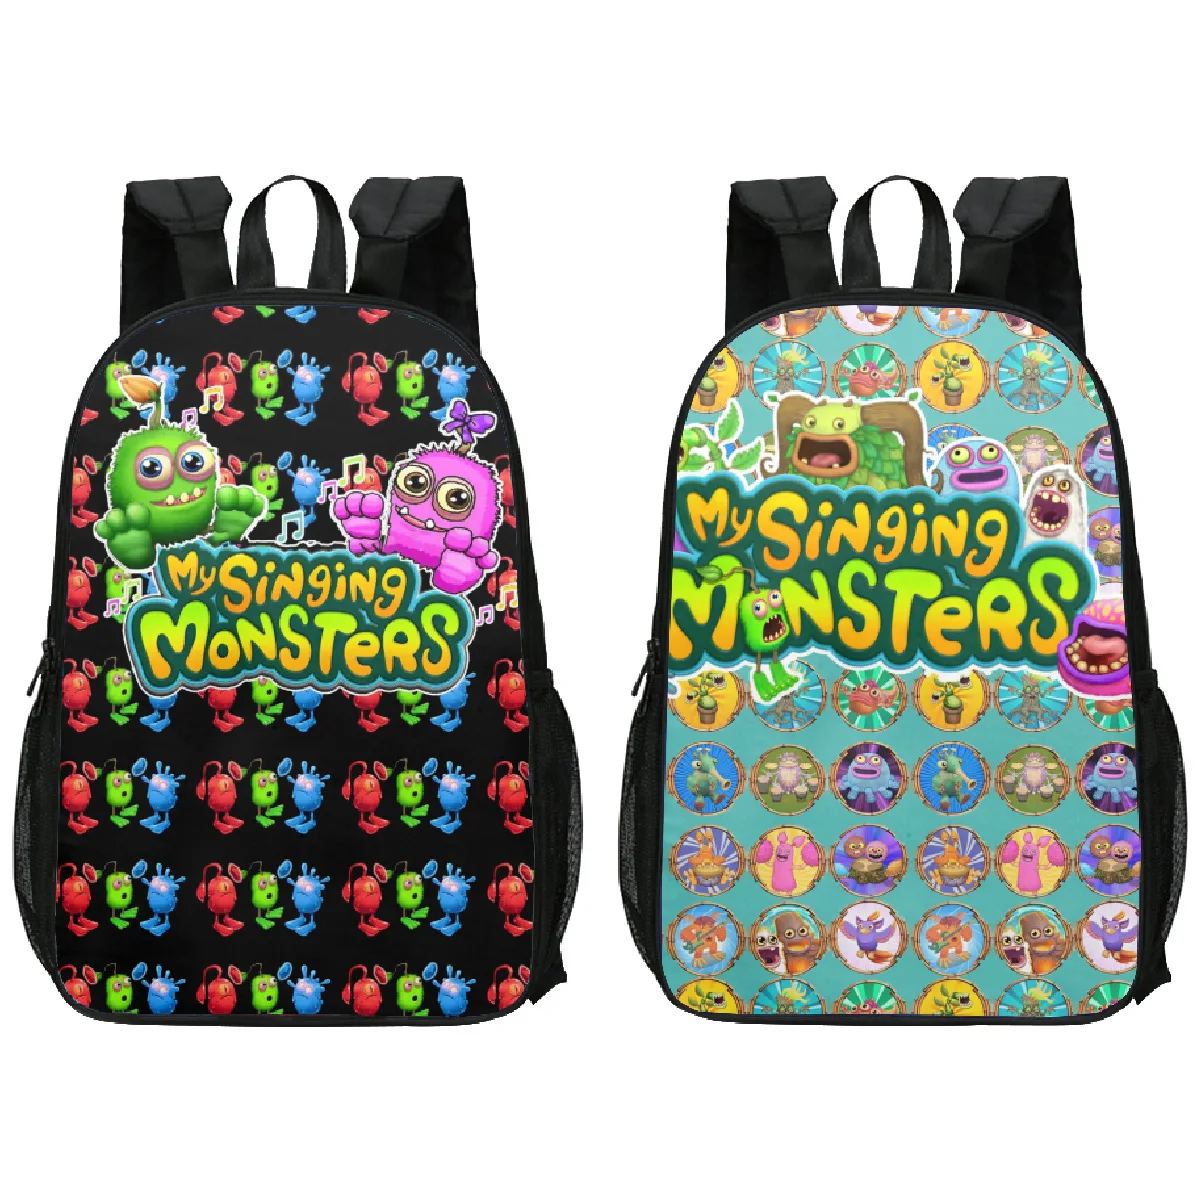 

3D New Double-sided Printing My Singing Monsters Monster Concert Schoolbag Backpack for Primary and Secondary School Students